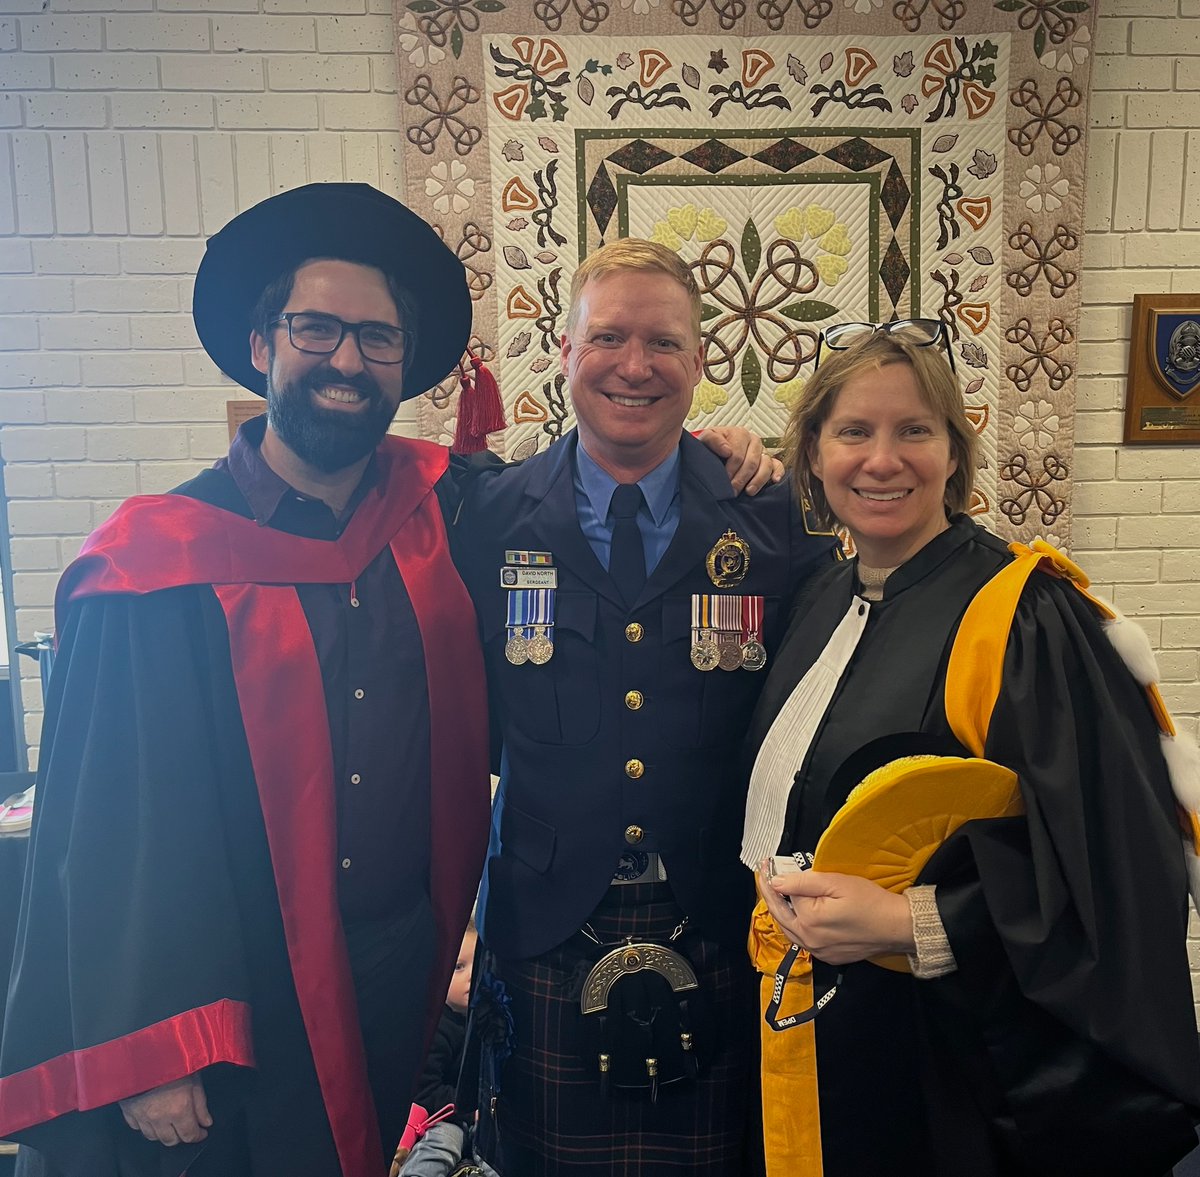 How immensely enjoyable is graduation time? Double the fun today as one of our PhD students was also in the band!
@DrJamesDwyer and I in full academic regalia at the @TasmaniaPolice academy, and one of our stellar PhD students. Love them team I work with.
@UTAS_ @TILES_UTAS